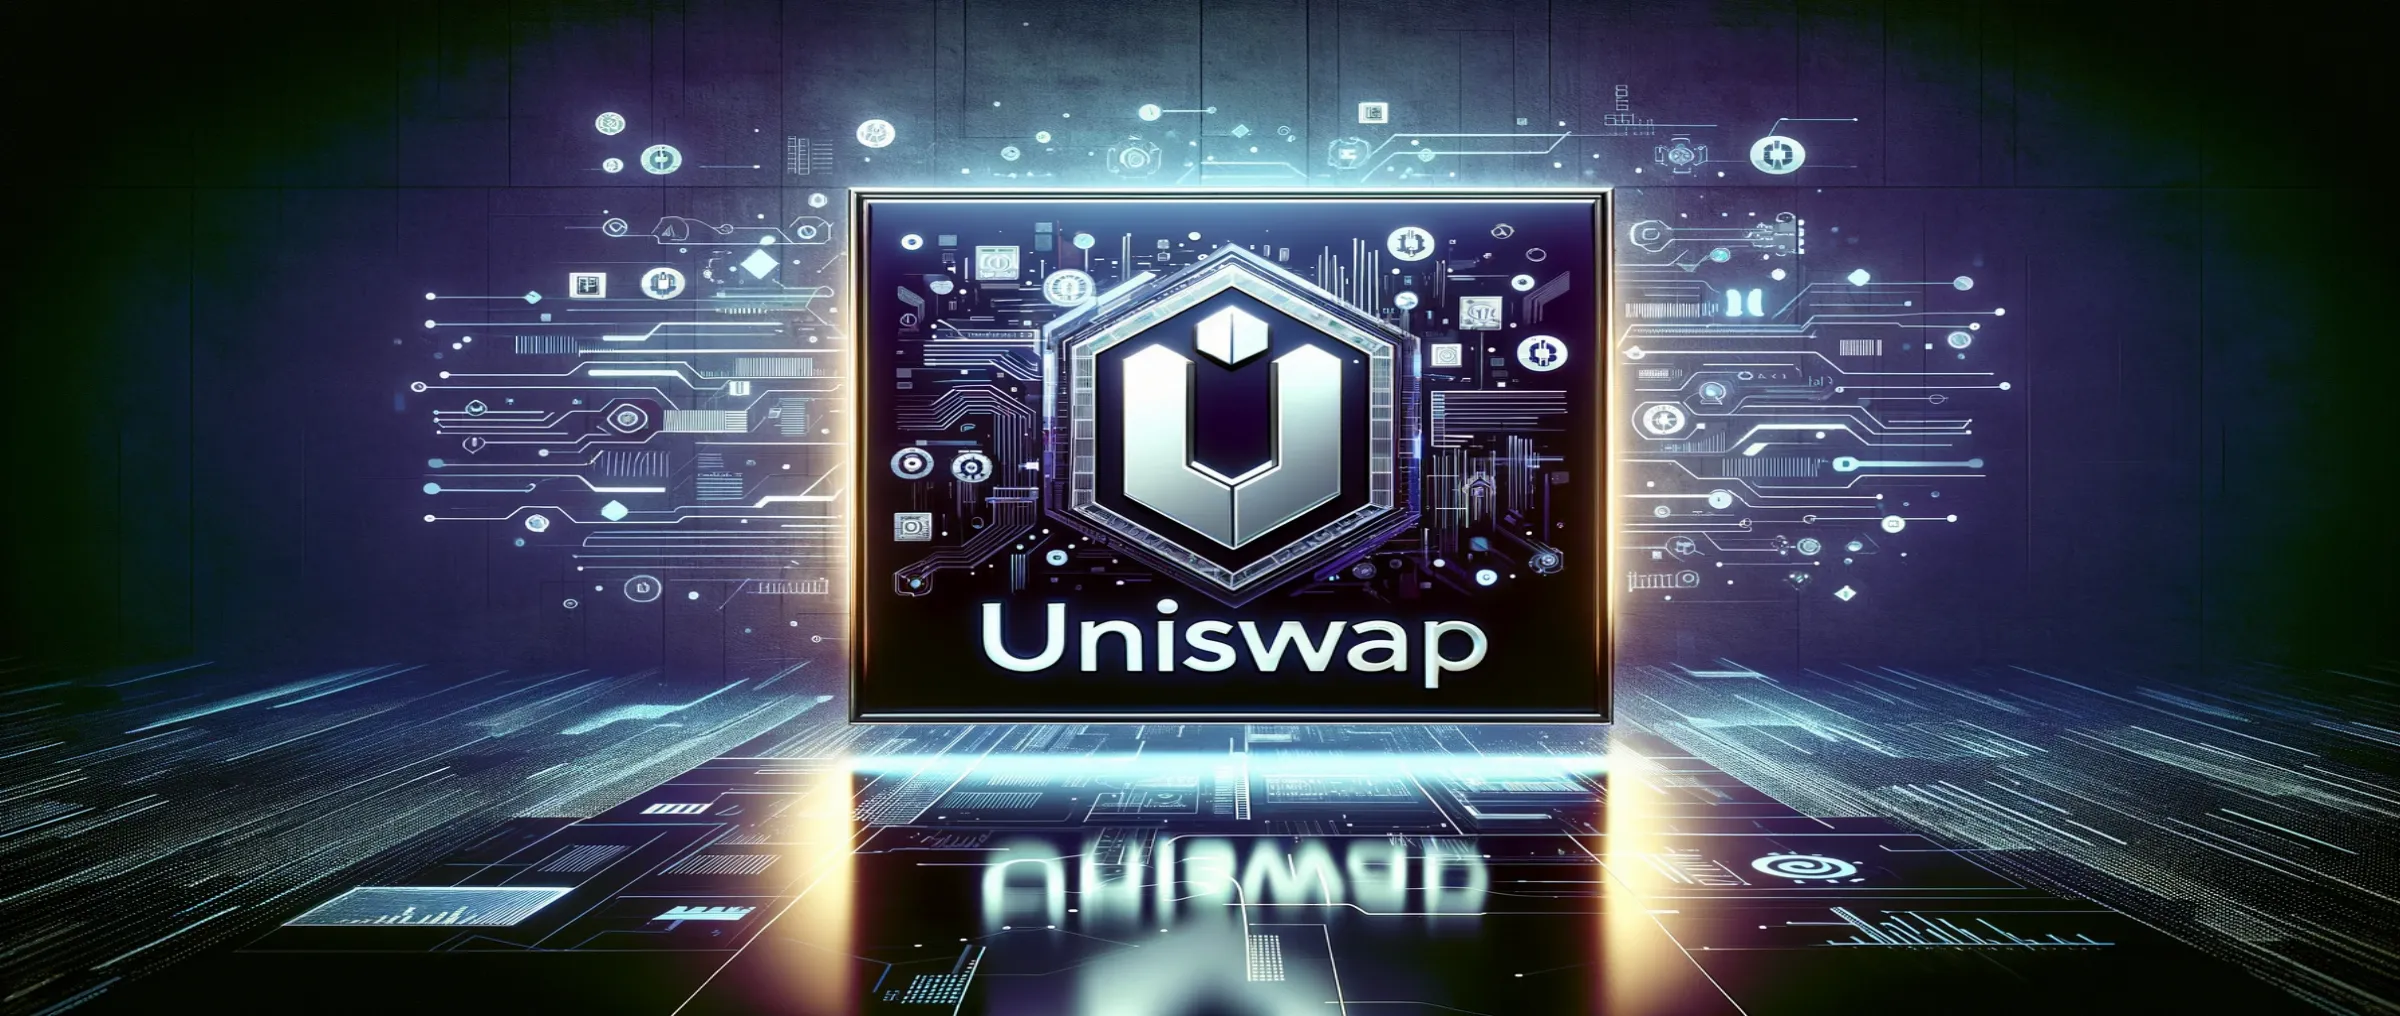 Uniswap allocates $300,000 for the development of version 4 in order to achieve a KPI of $150 million